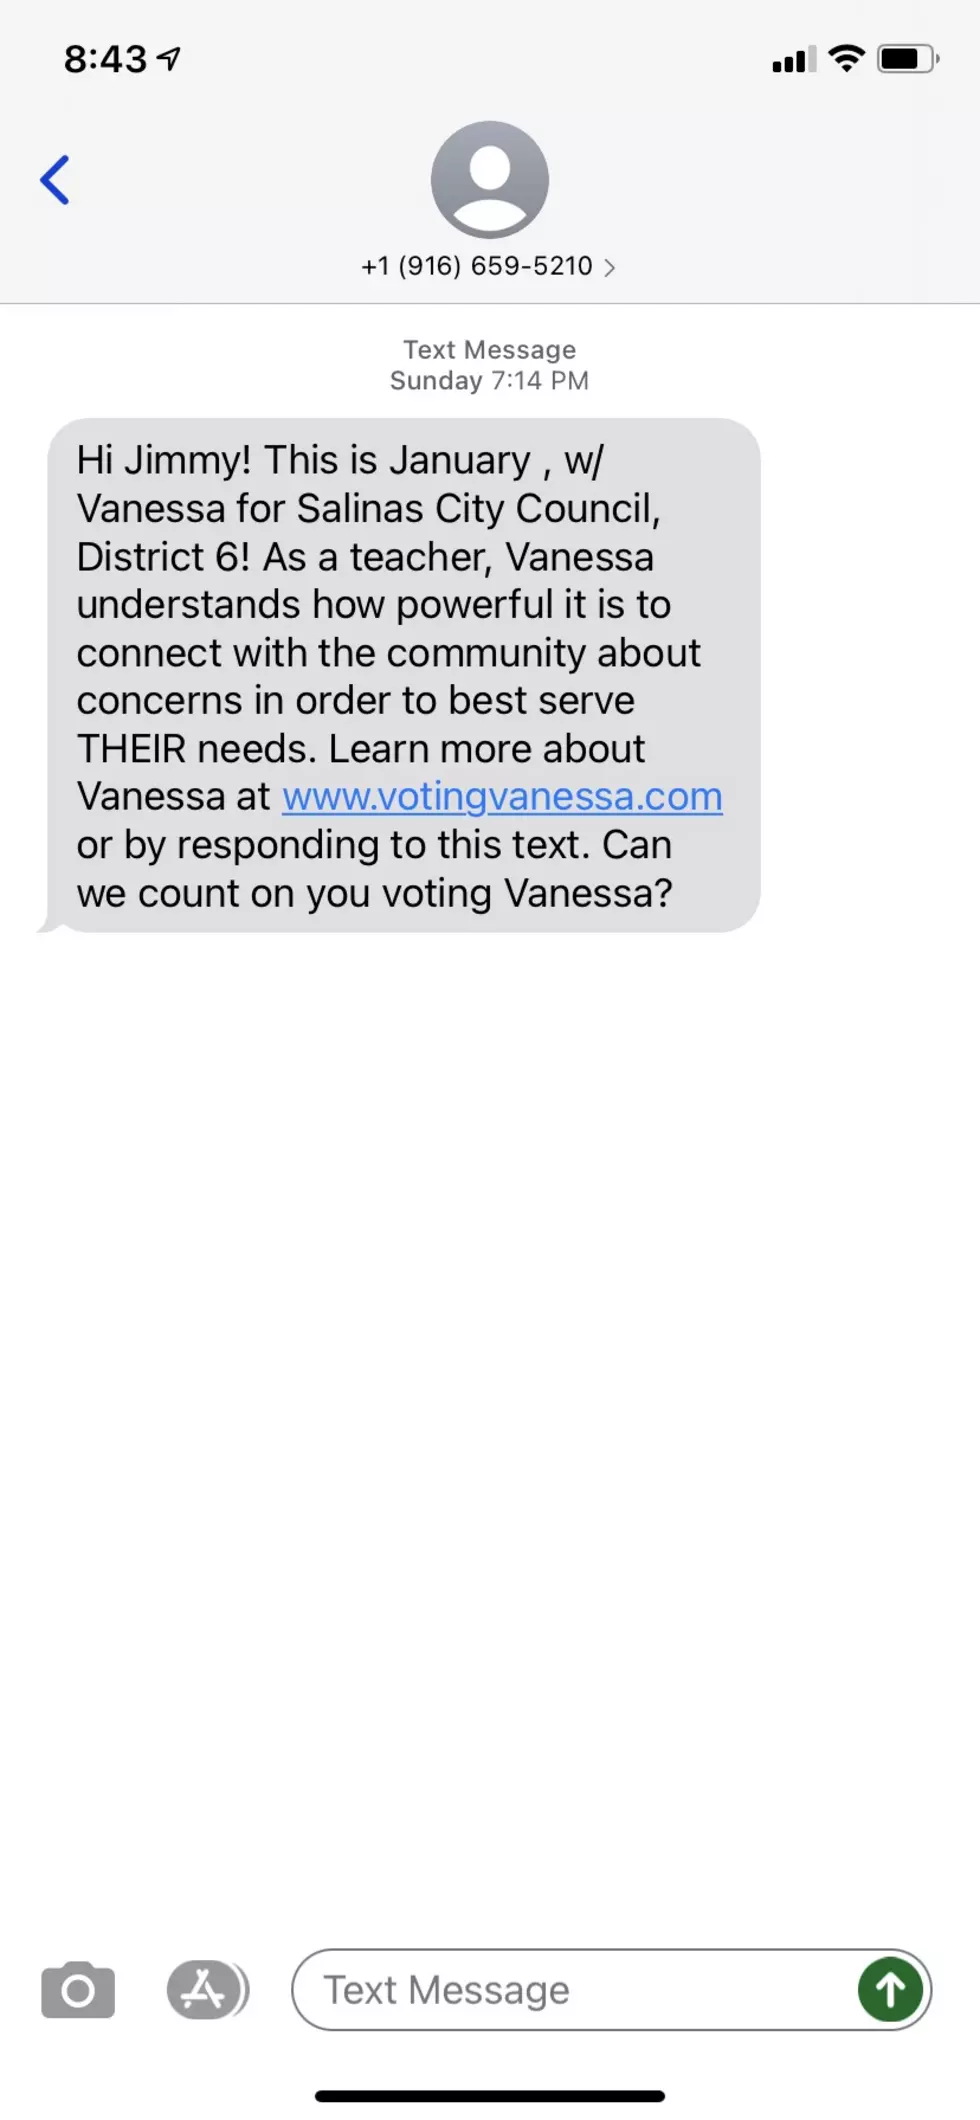 Are You Getting All These Campaign Texts? I Am. Here's What's Up 